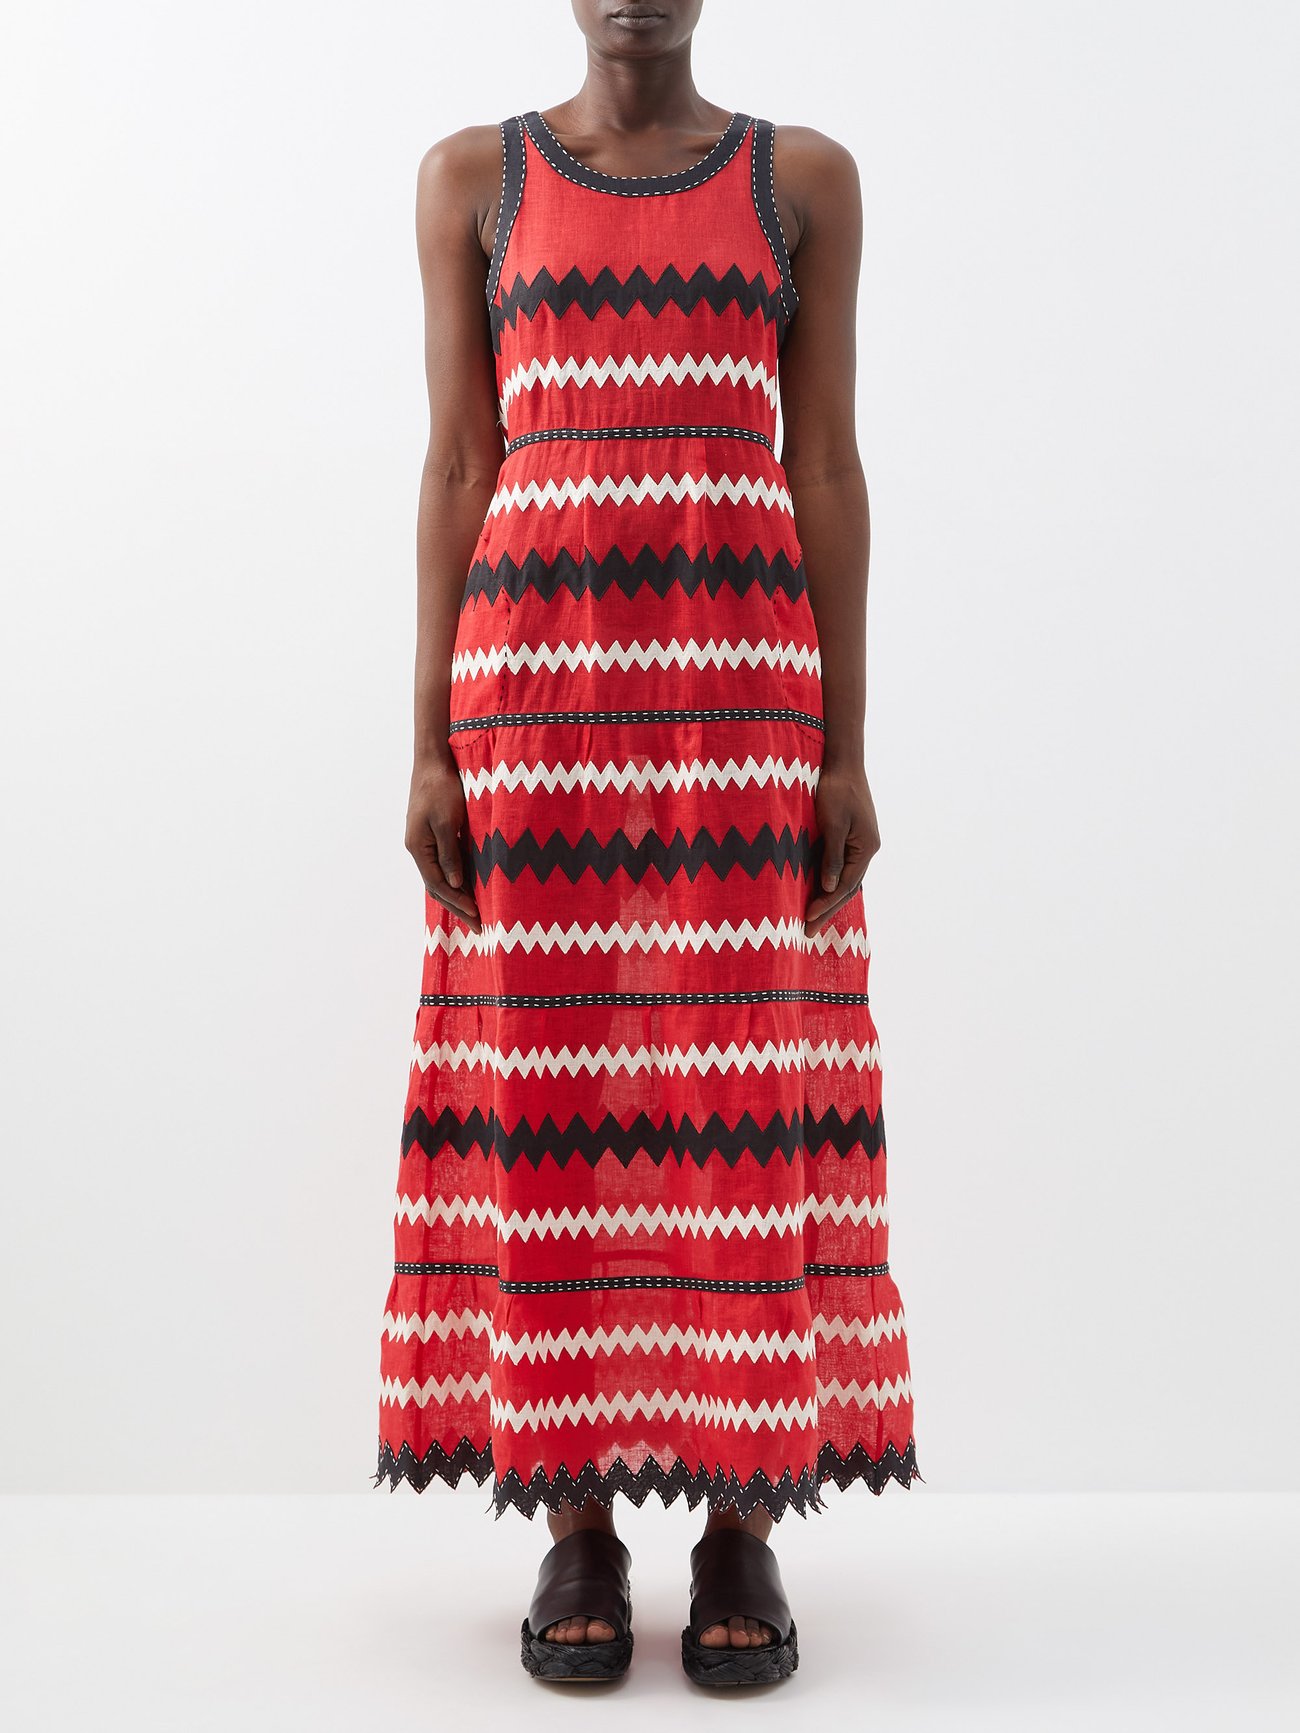 Vita Kin's red Ola dress is crafted from airy linen to a relaxed silhouette and appliquéd with black and white zigzags, celebrating the label's artistic outlook. It is sleeveless with a round neck, cinched waist, fuller skirt and maxi hemline. 